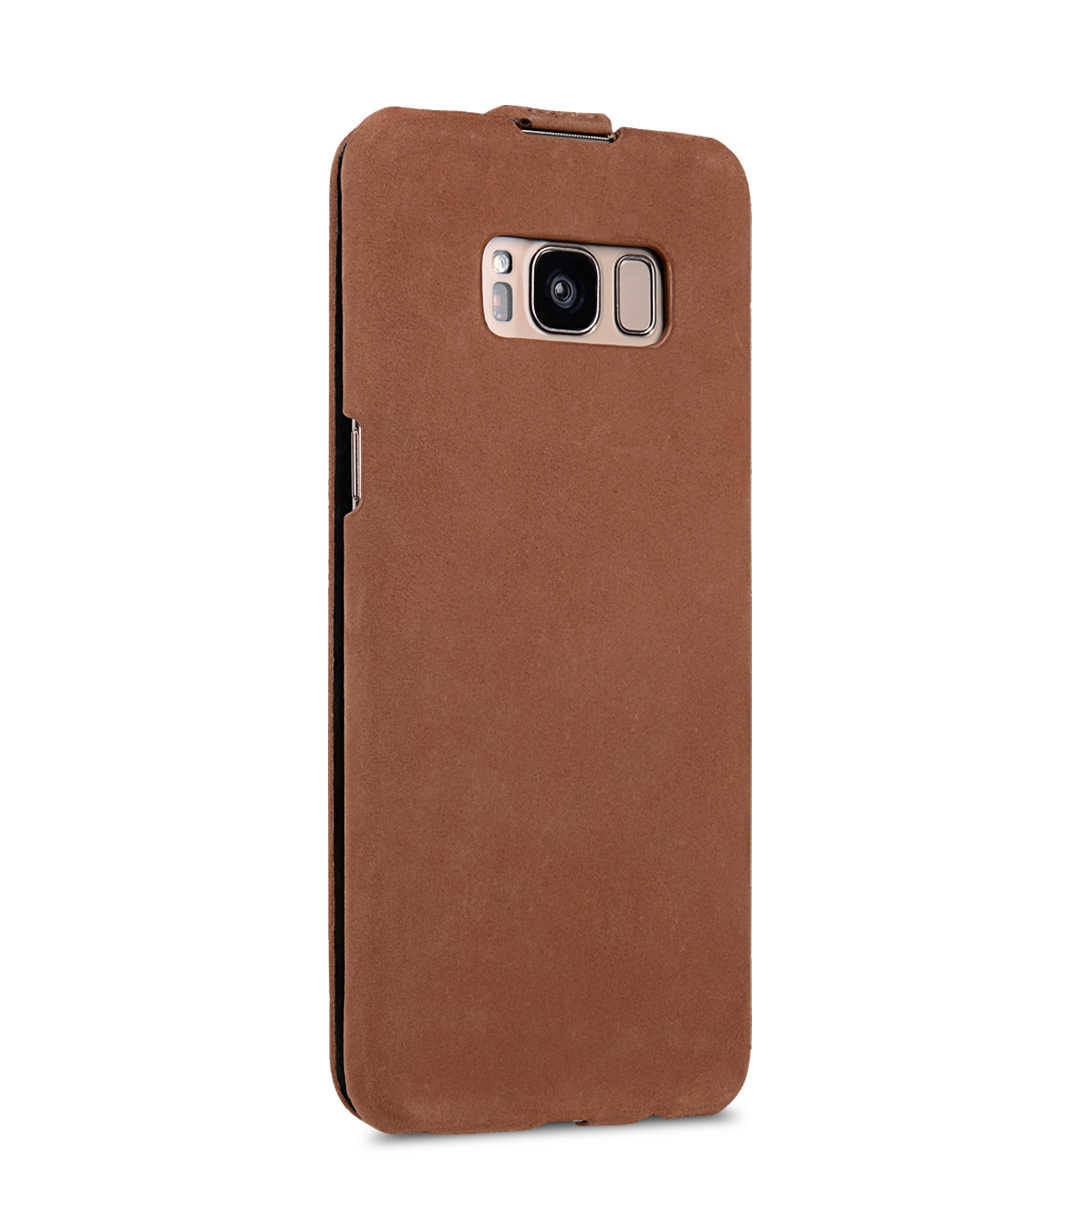 Melkco Premium Leather Case for Samsung Galaxy S8 - Jacka Type ( Classic Vintage Brown )